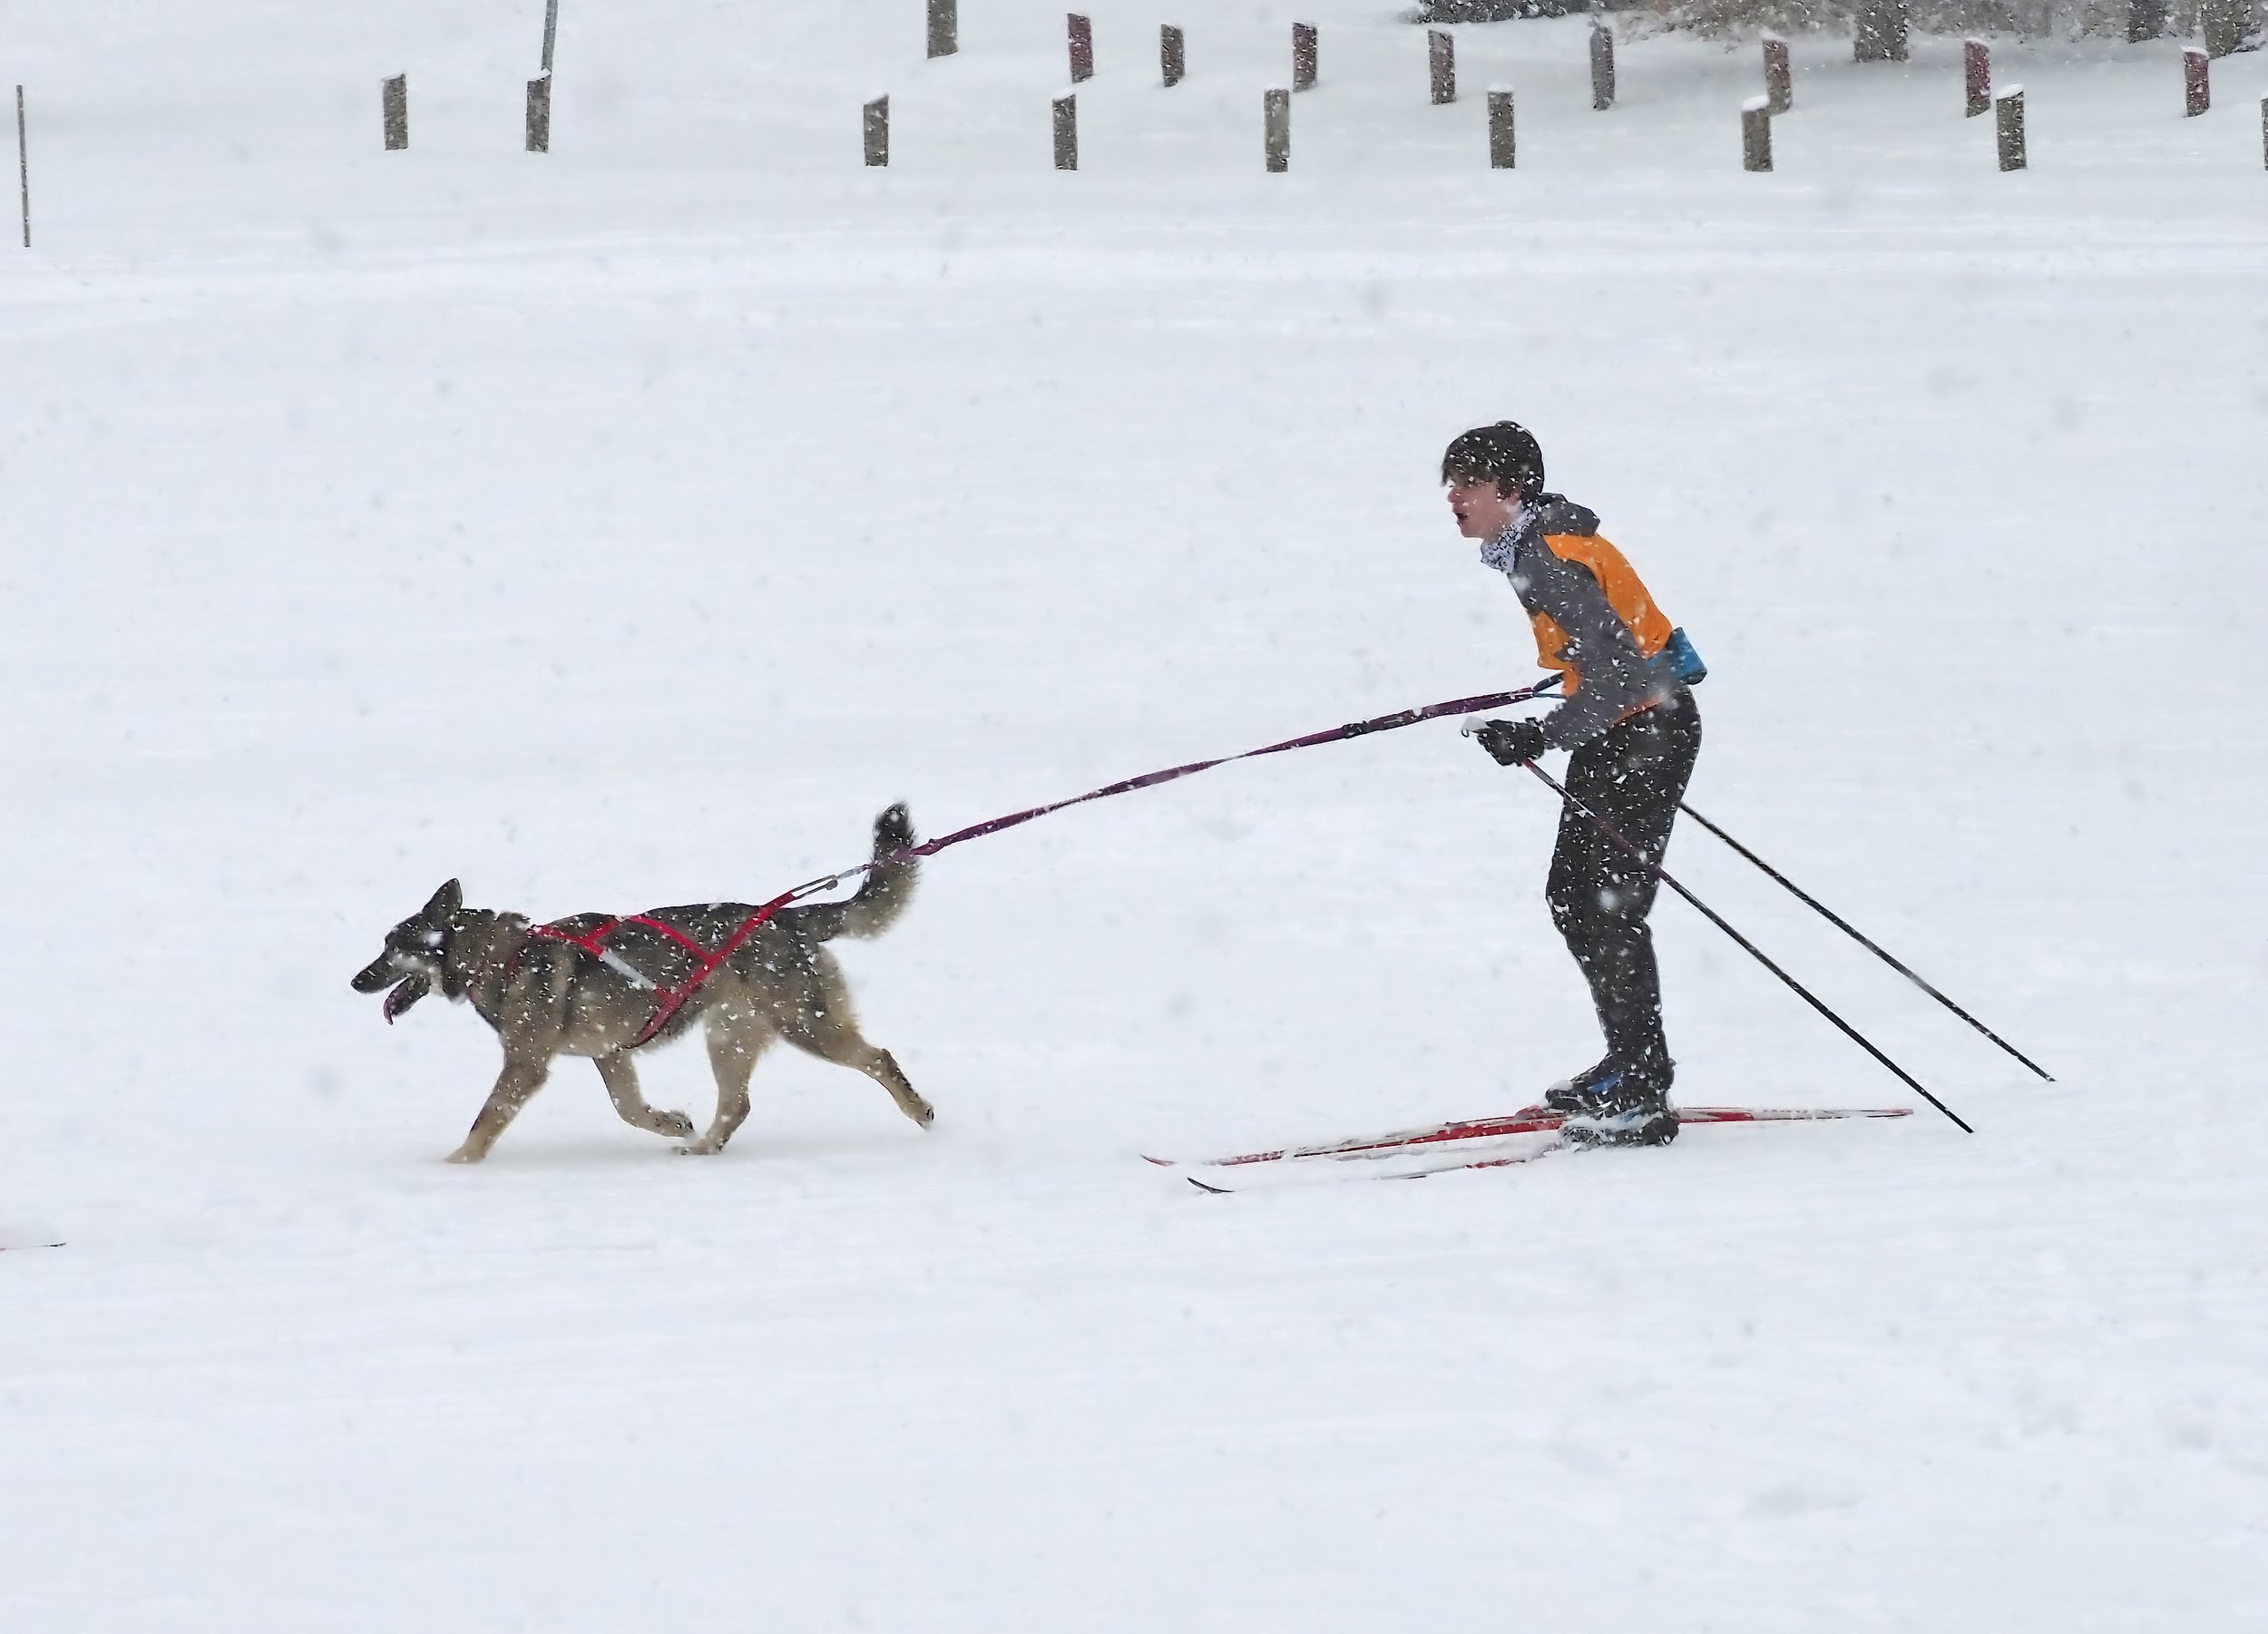  Skiing while attached to a dog in harness is called skijoring. Photo by Gordon Miller  